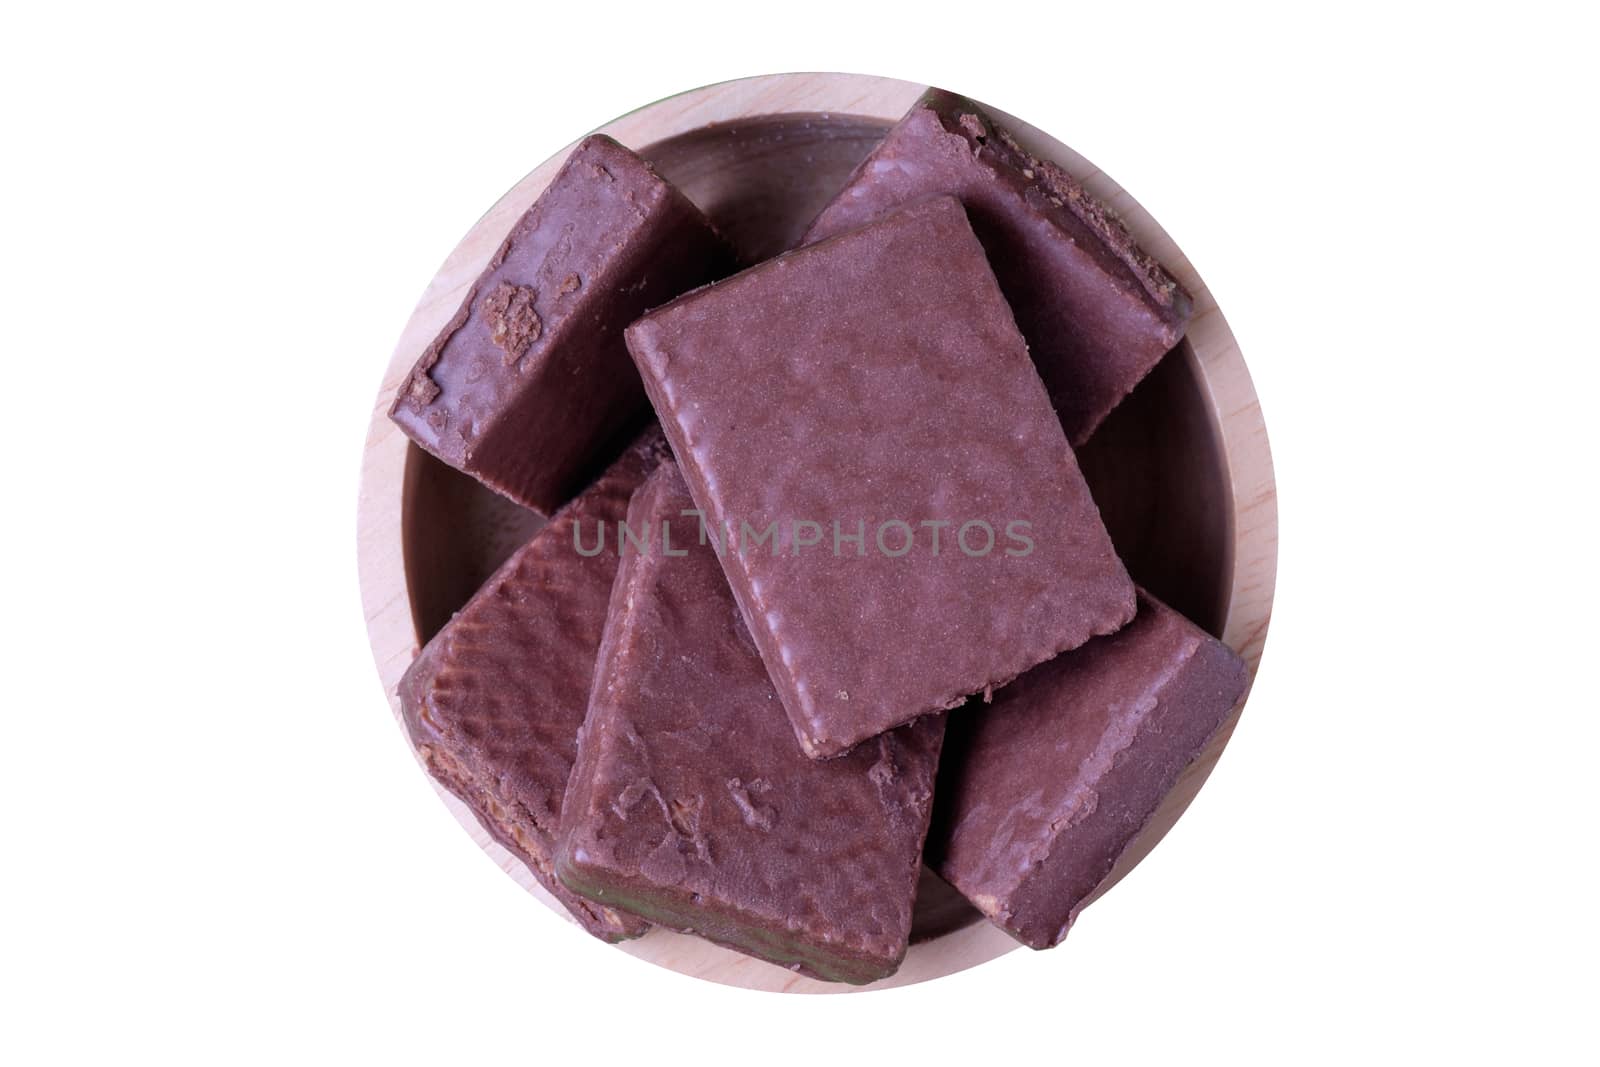 chocolate wafer in wooden bowl, isolate white background.